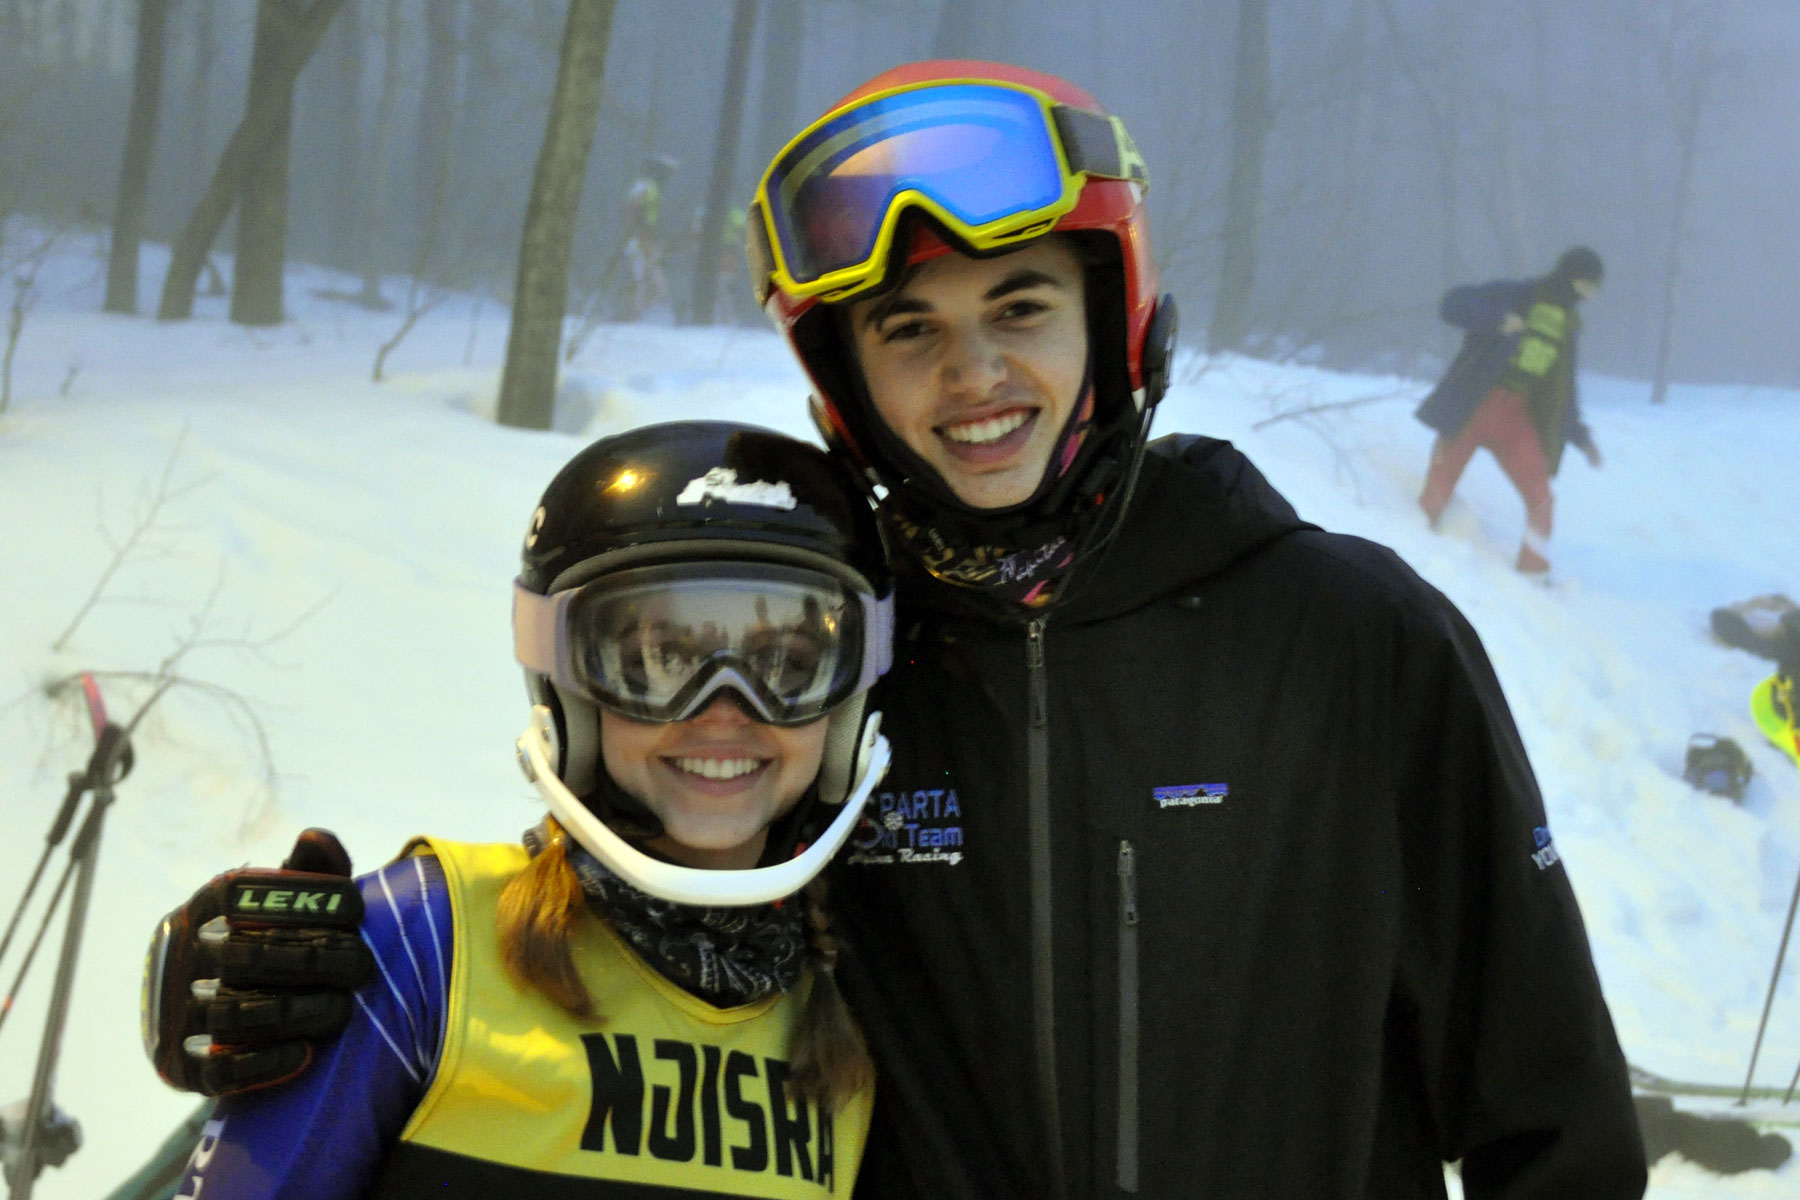 The Youngs - Sunny & Drew at Race #1 Blue Mountain